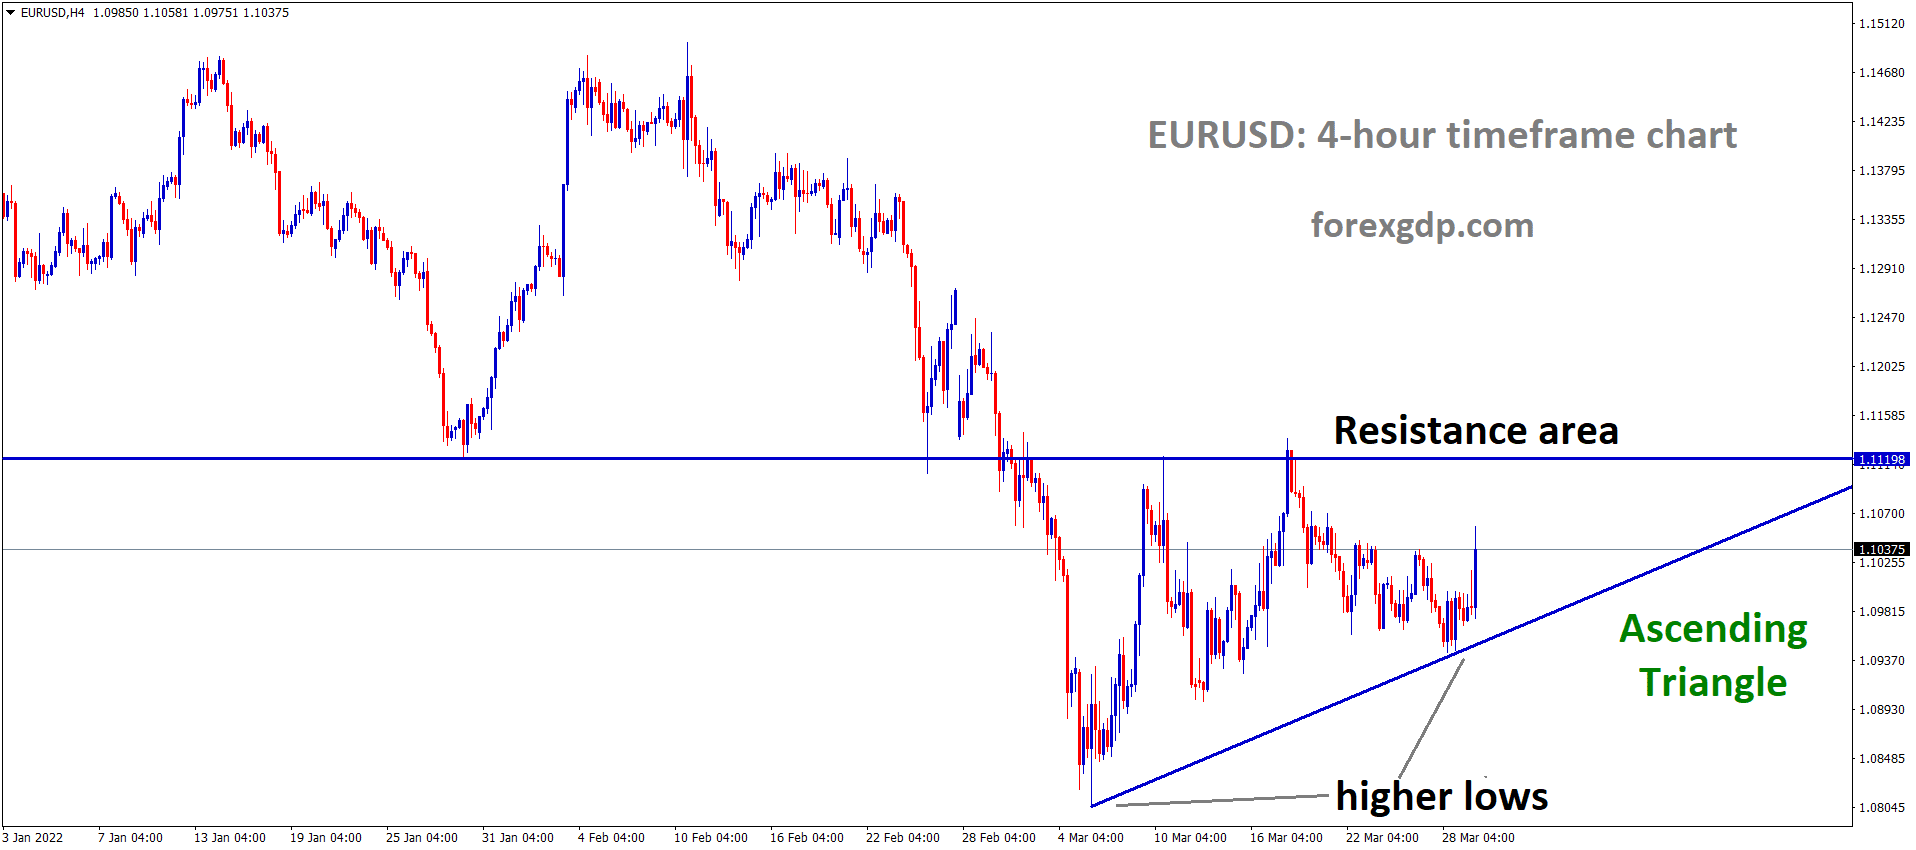 EURUSD H4 Time Frame Market has rebounded from the higher low area of the Ascending triangle pattern.